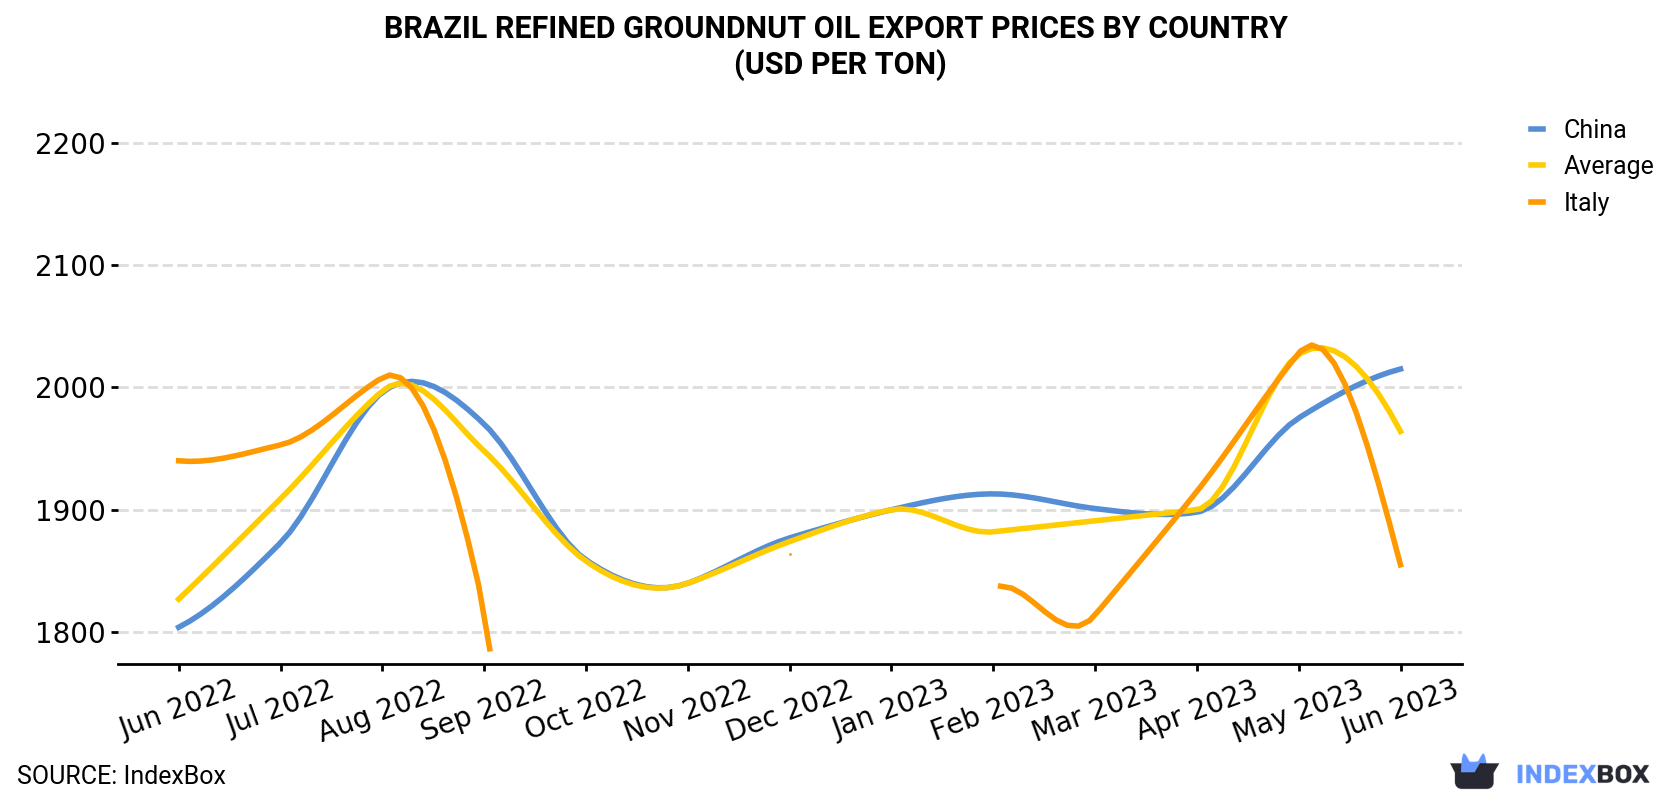 Brazil Refined Groundnut Oil Export Prices By Country (USD Per Ton)